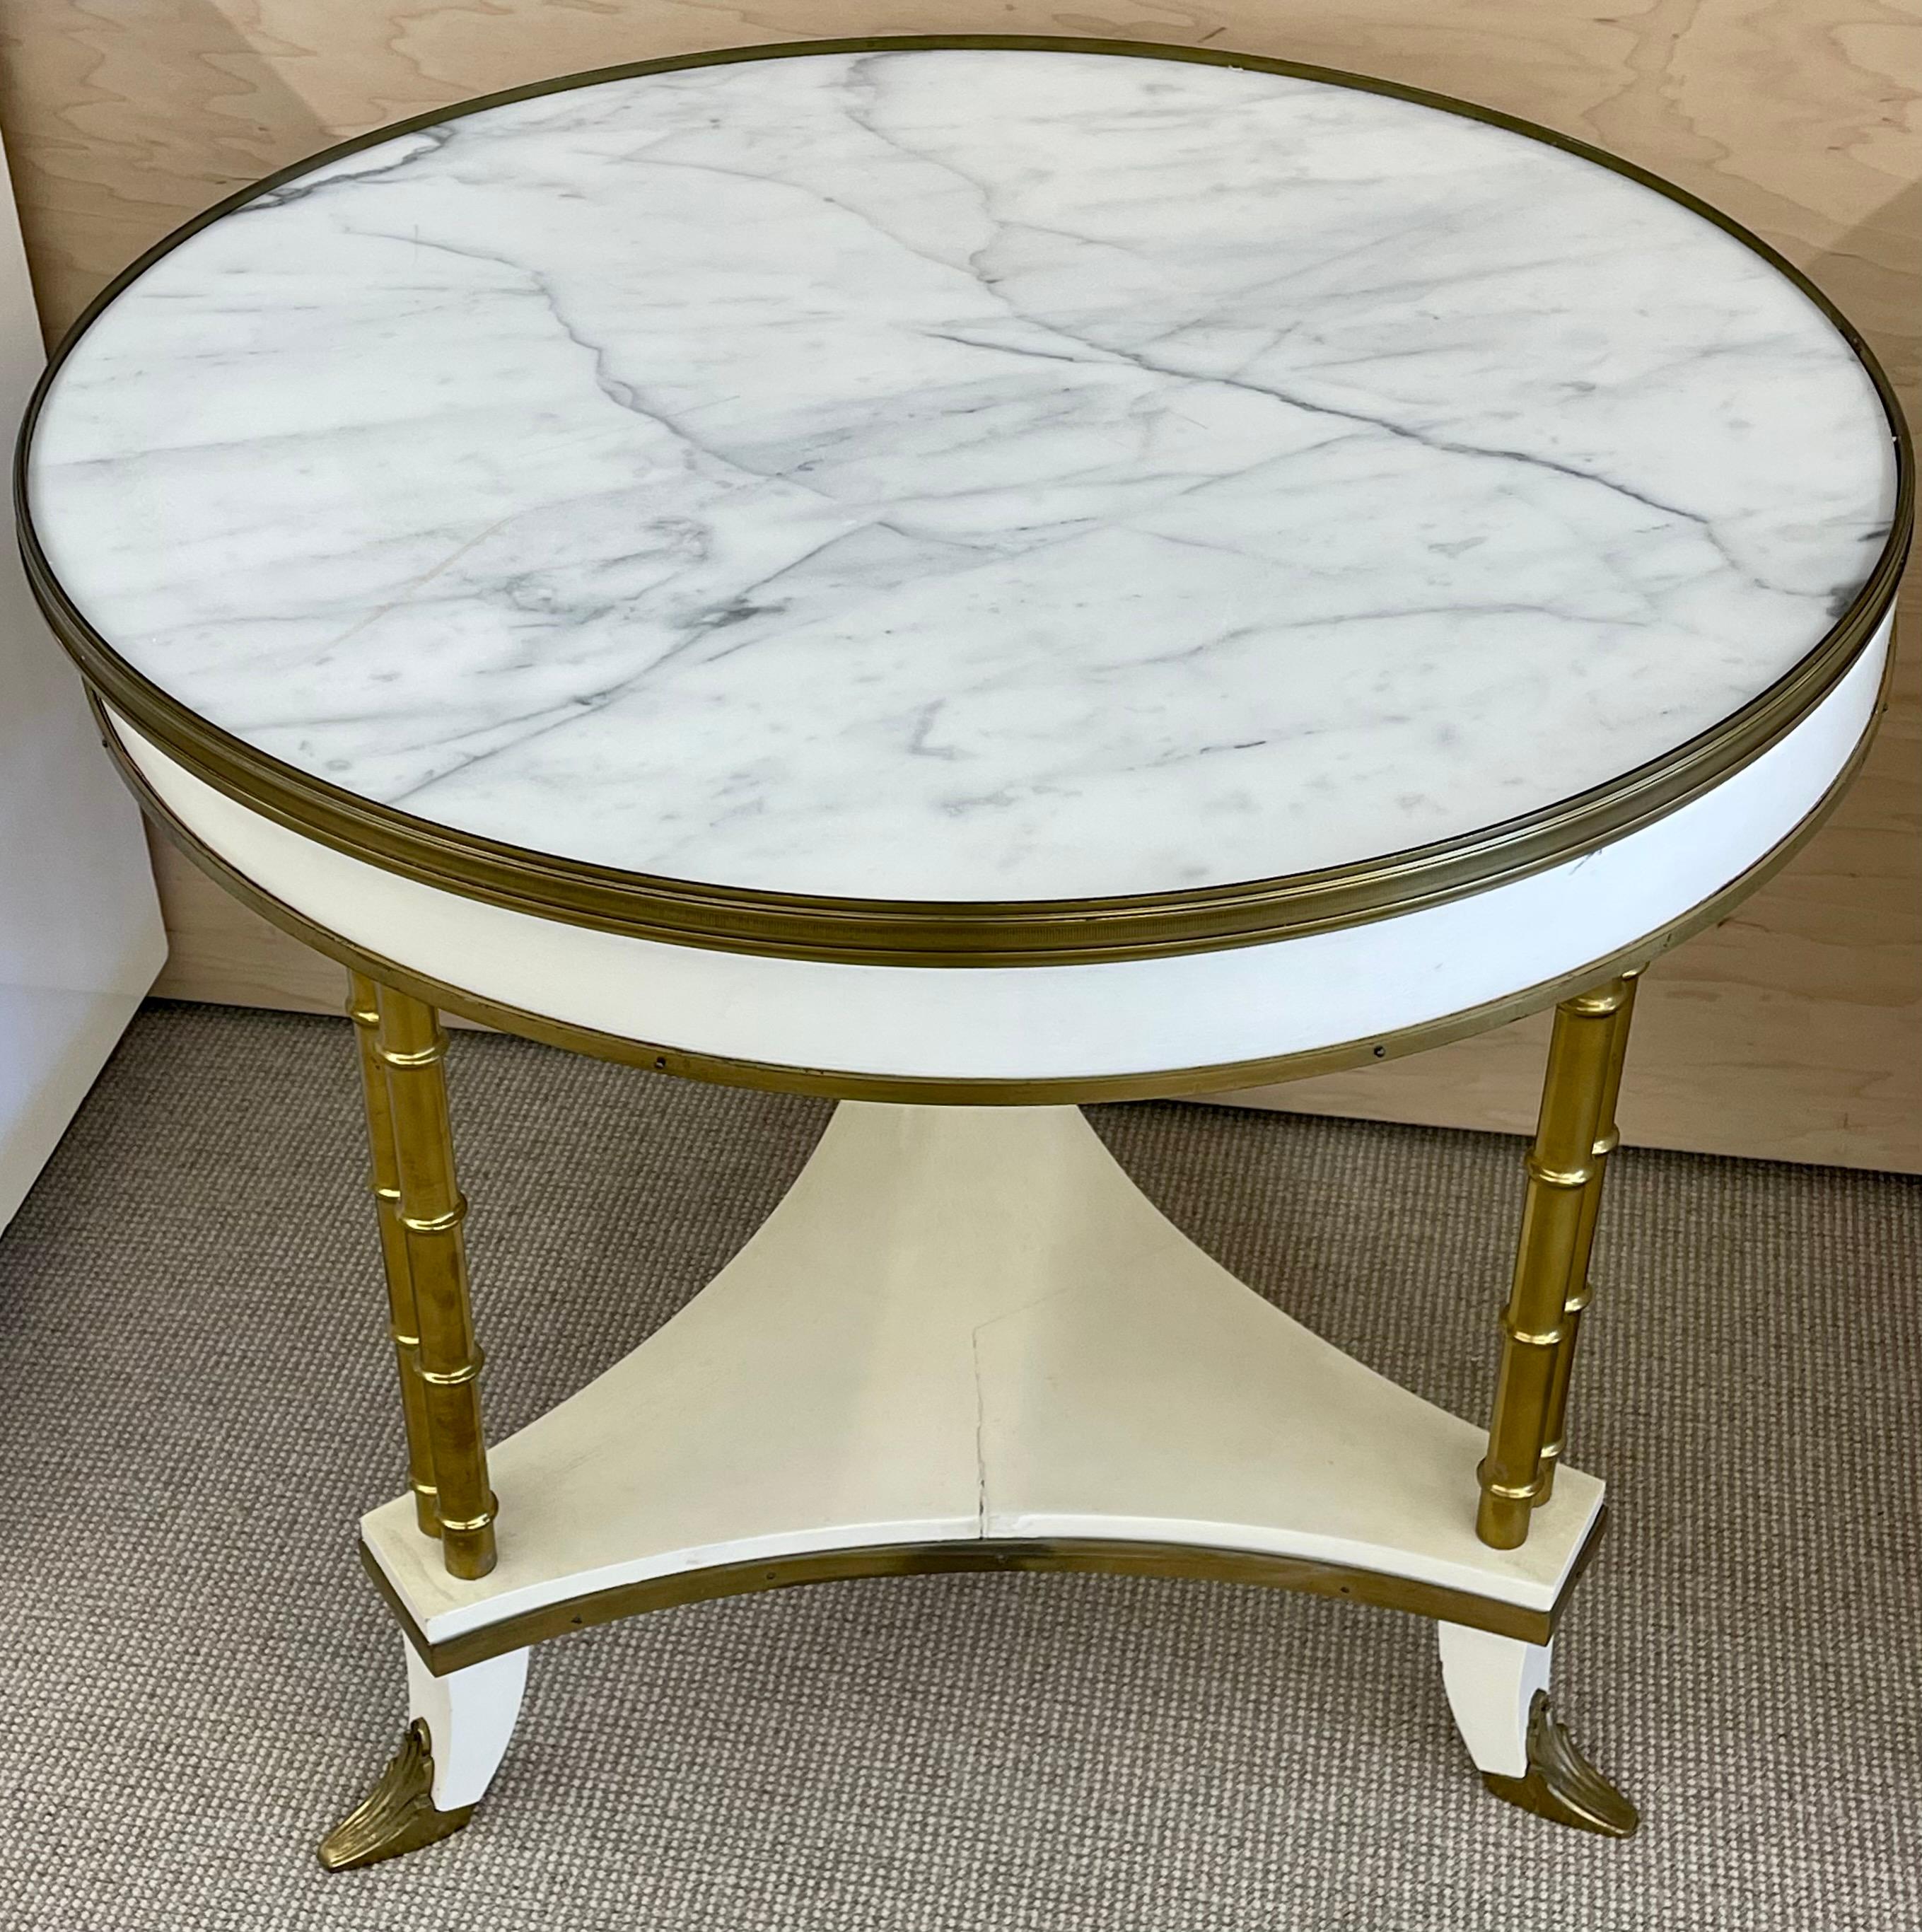 Hollywood Regency White Lacquered Brass Mounted Marble Top Bouilliote Table Style of Maison Jansen